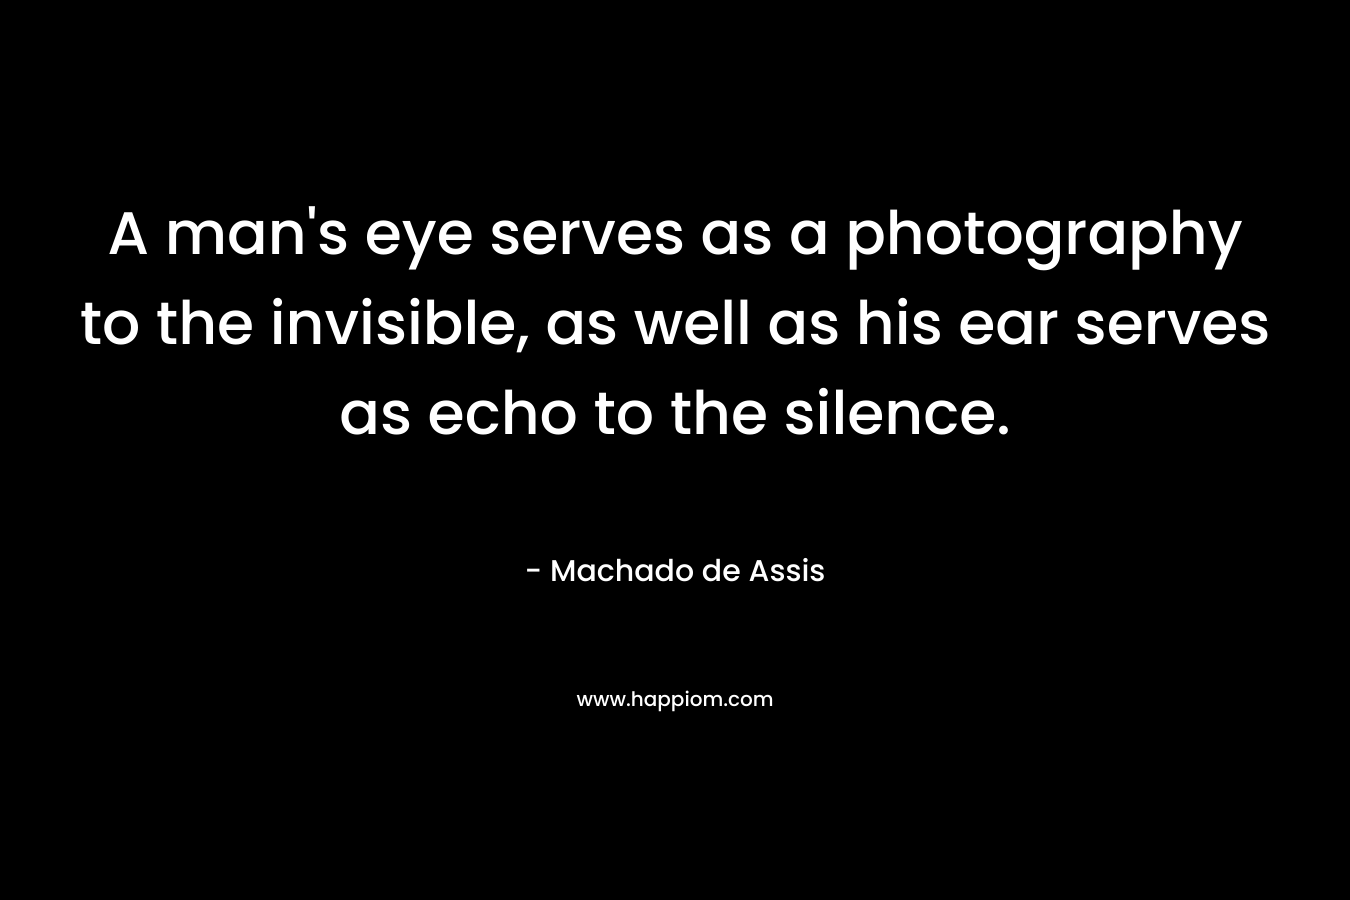 A man’s eye serves as a photography to the invisible, as well as his ear serves as echo to the silence. – Machado de Assis